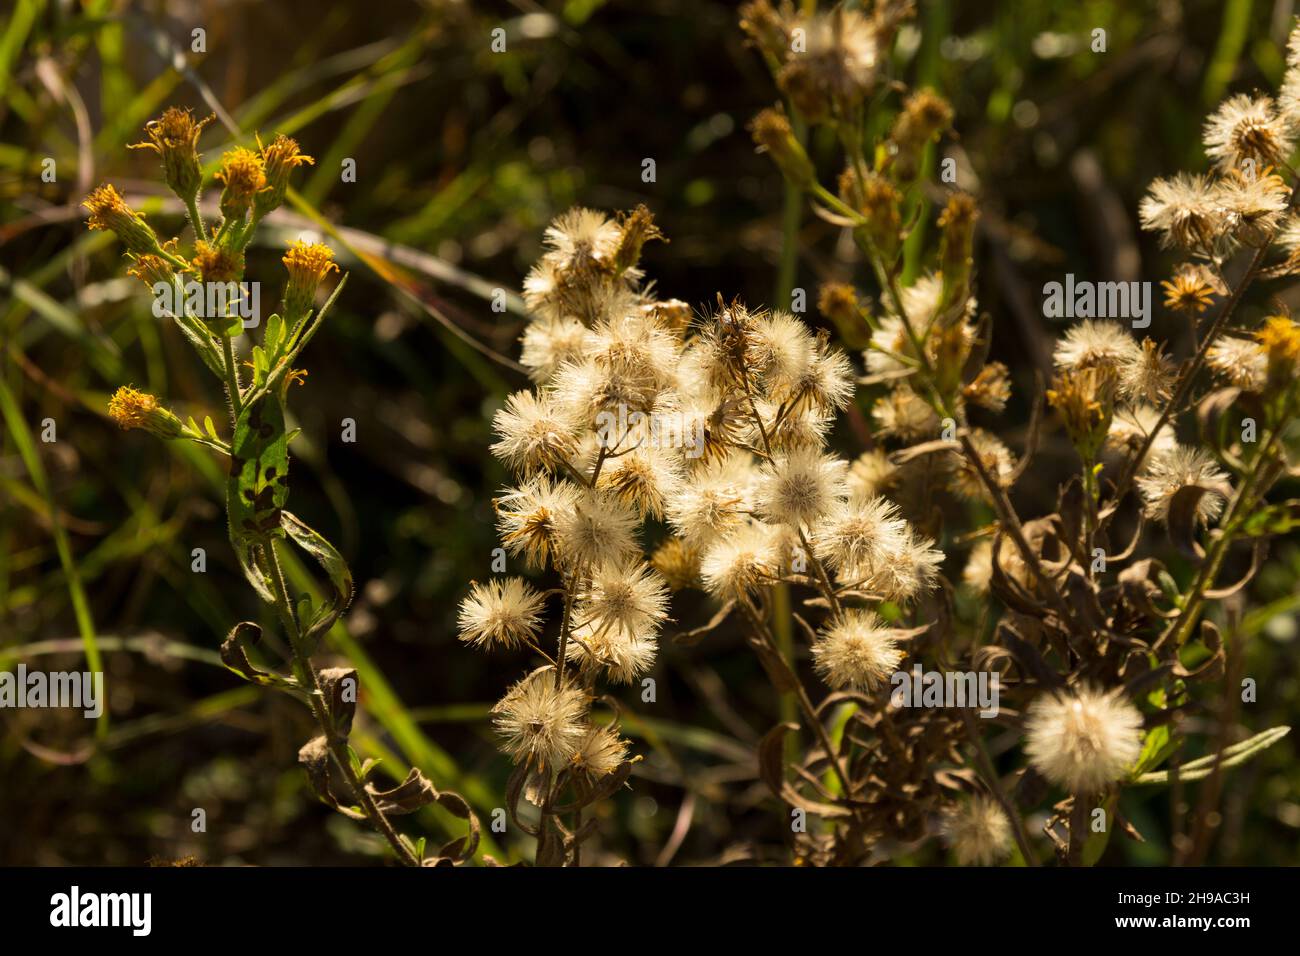 The flower of the Dandelion plant in winter Stock Photo